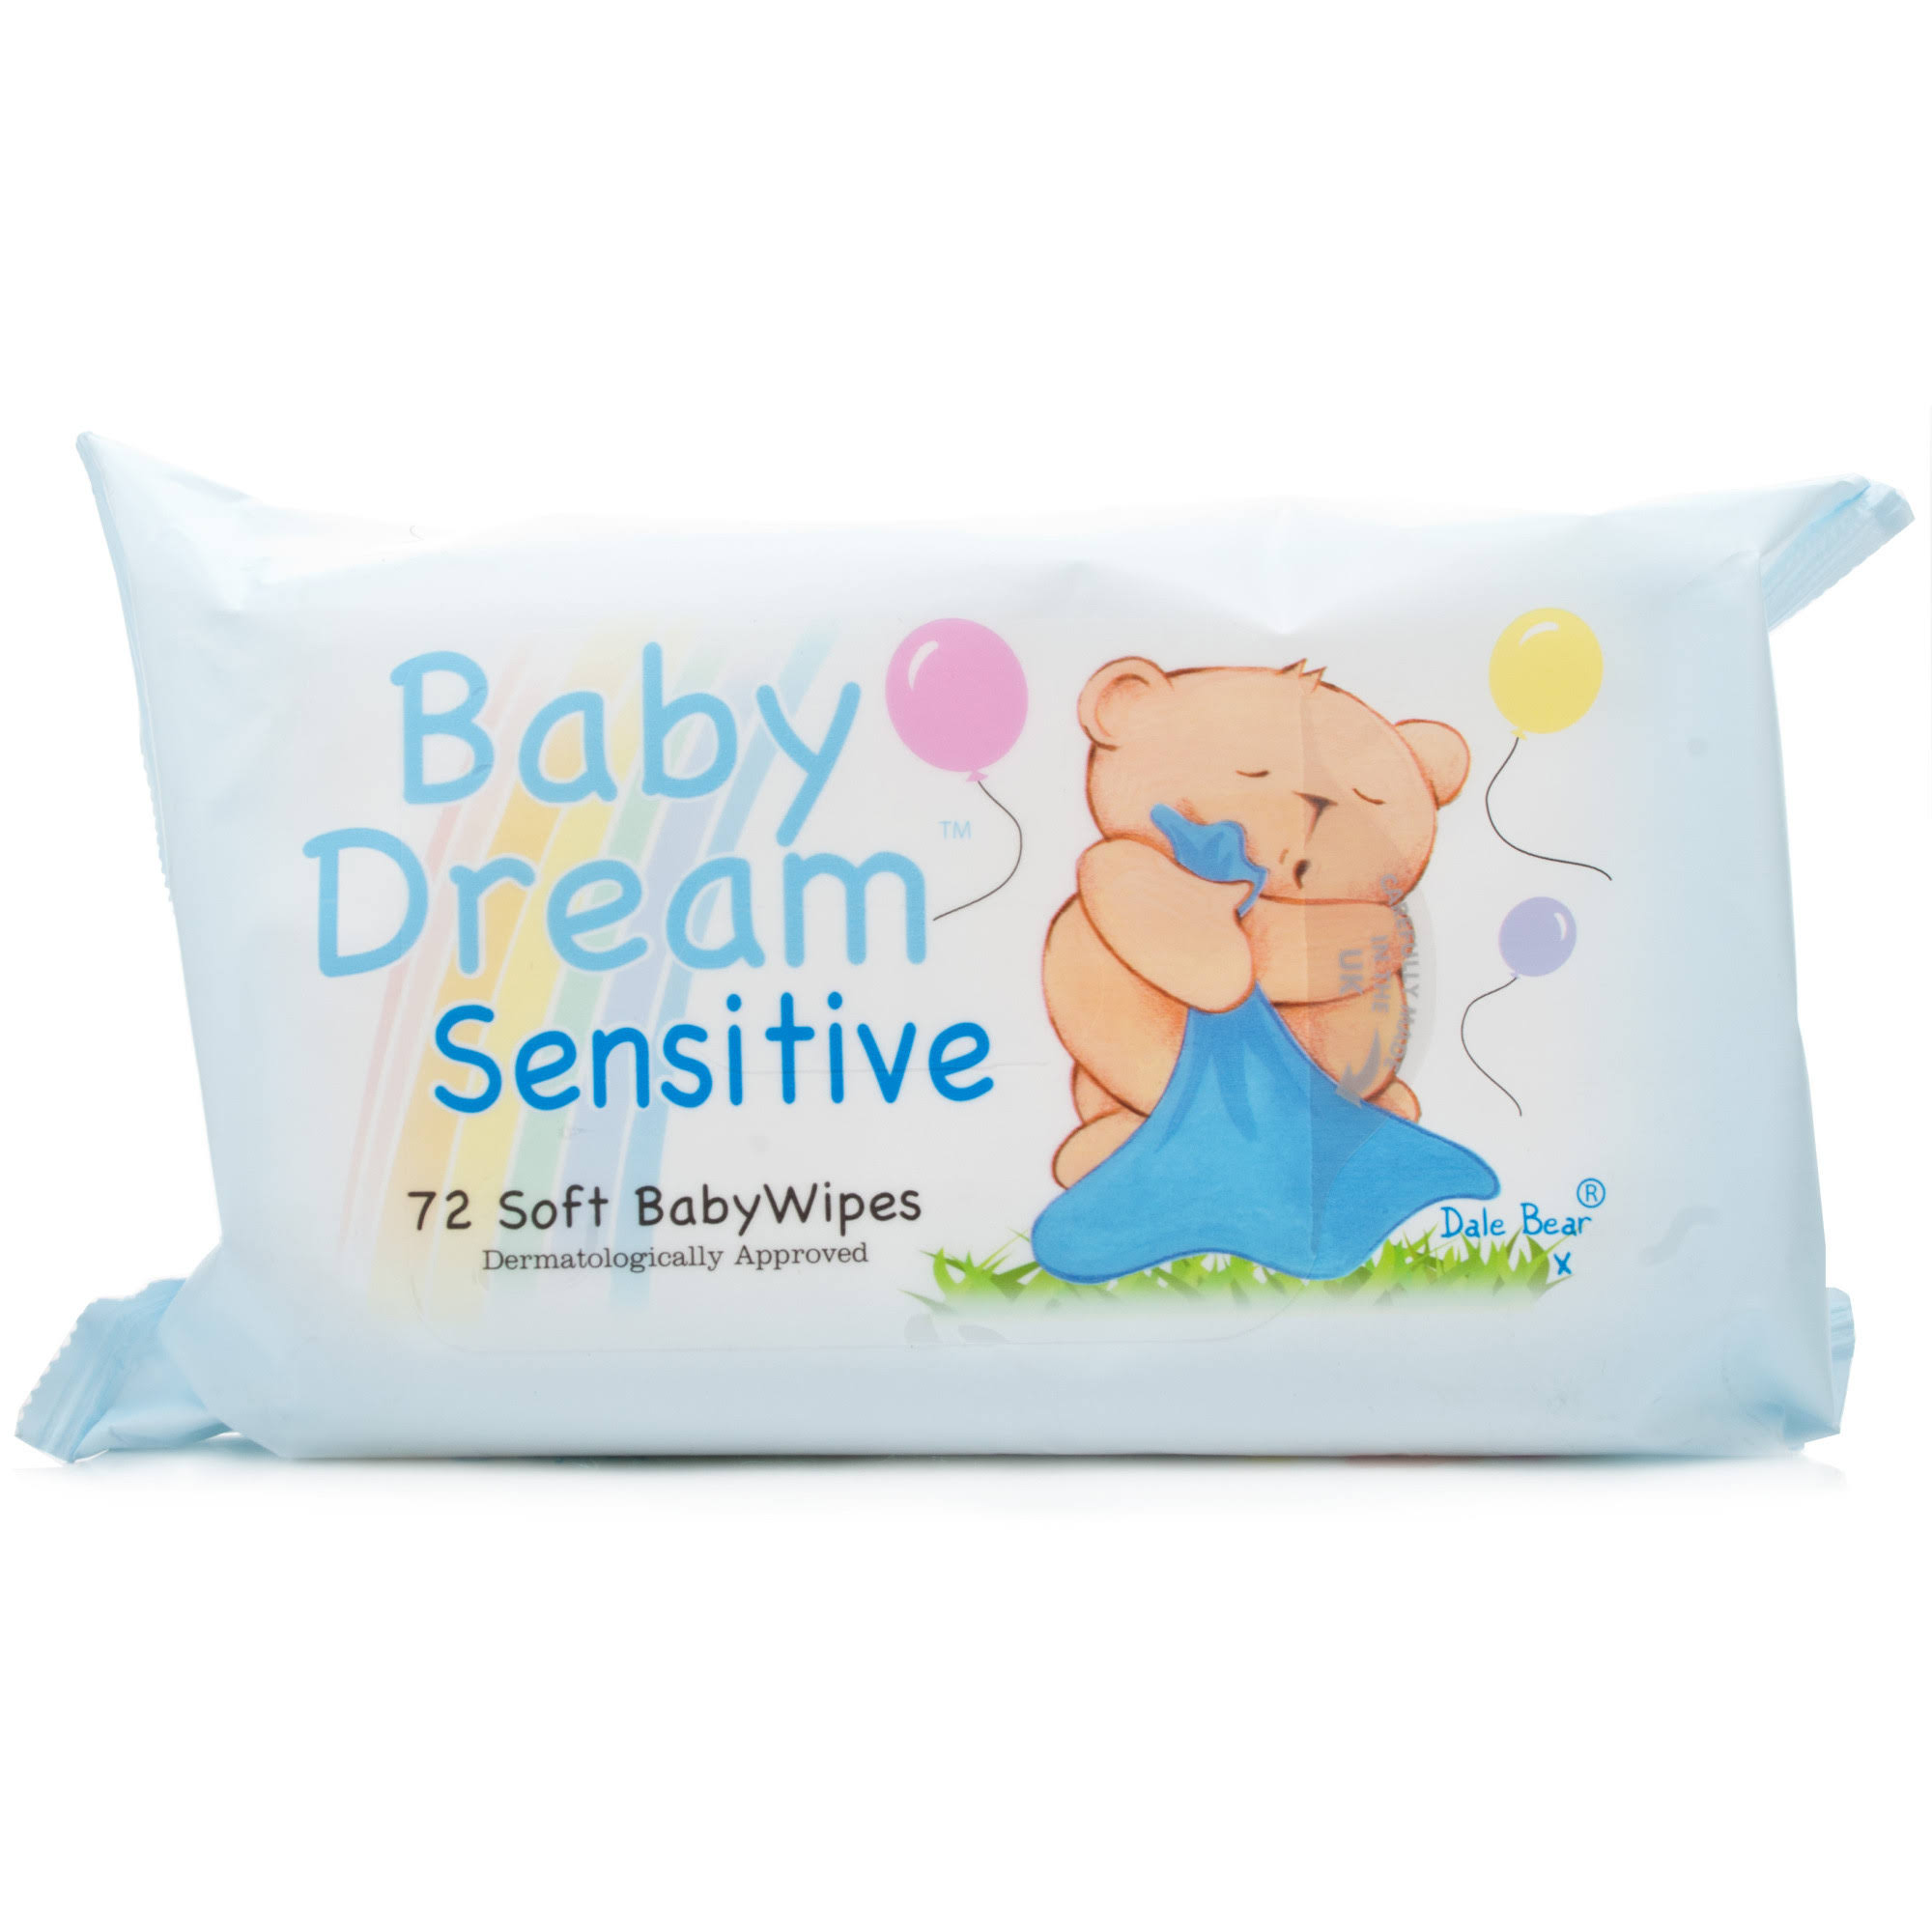 Baby Dream Sensitive Fragrance Free - 72 Soft Baby Wipes